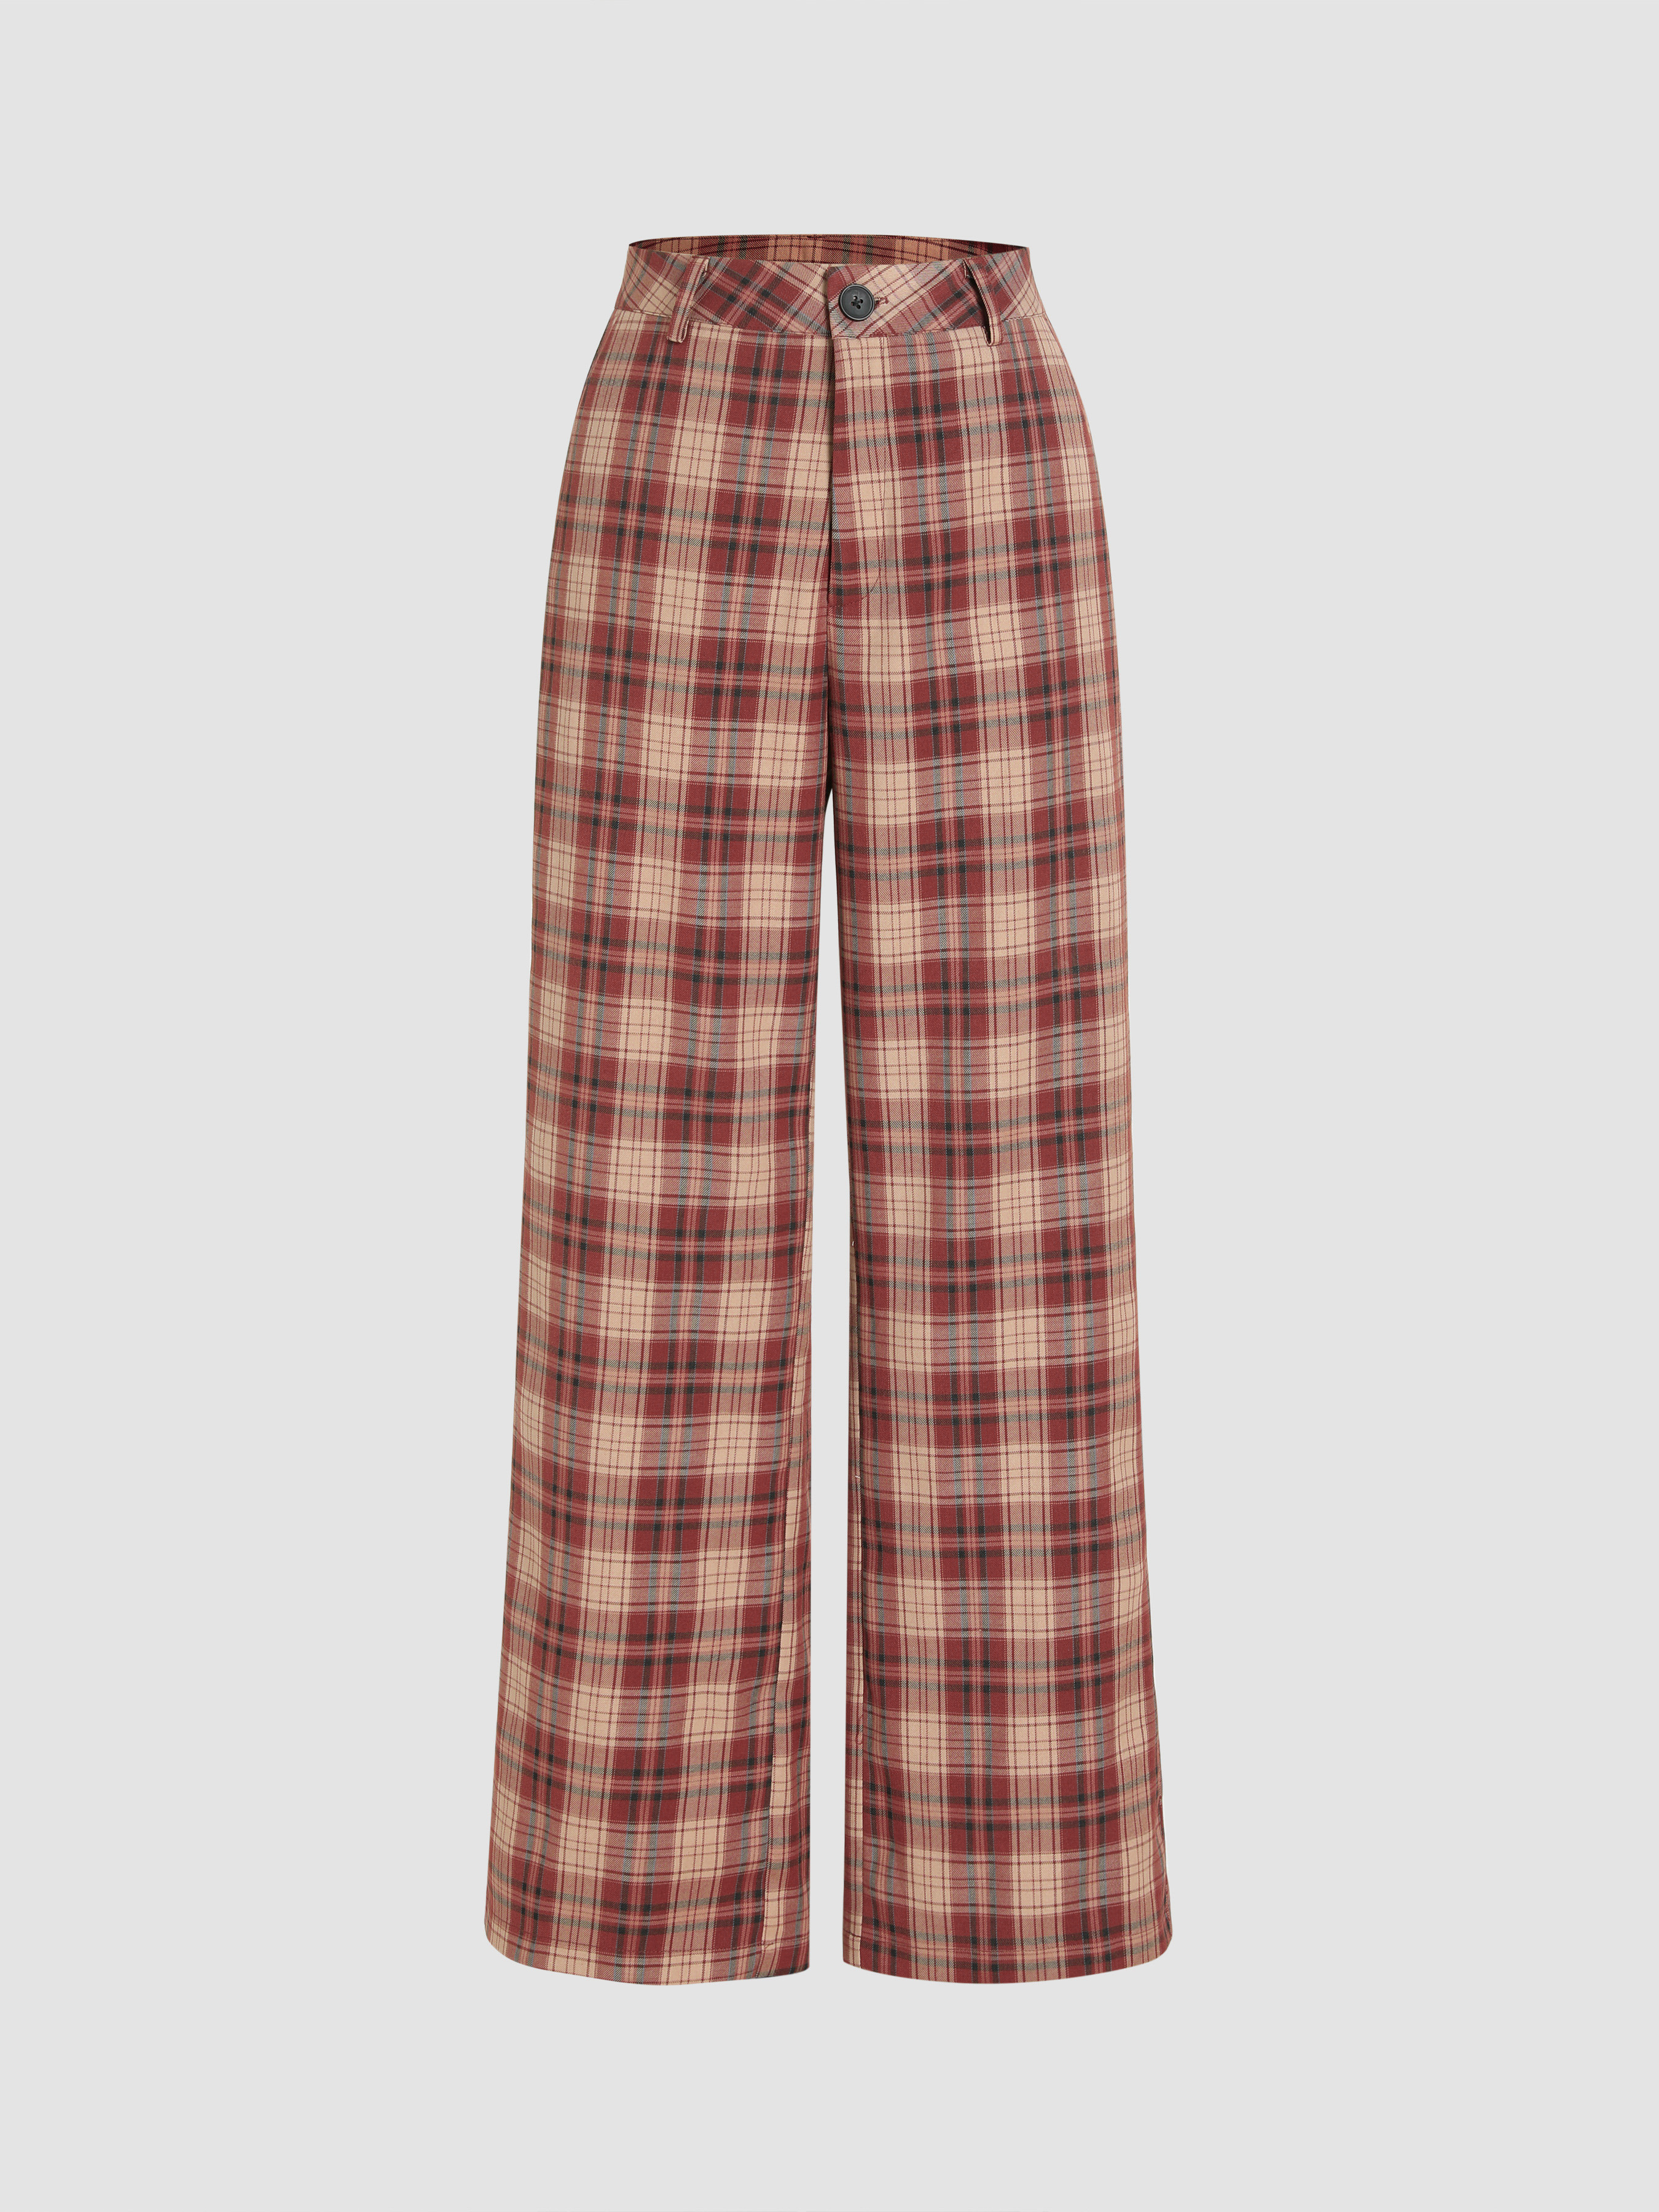 Chic Red Tartan High Waist Casual Pants For Women Retro Long Straight  Streetwear Ladies Check Trousers With Pocket From Luo03, $18.86 | DHgate.Com